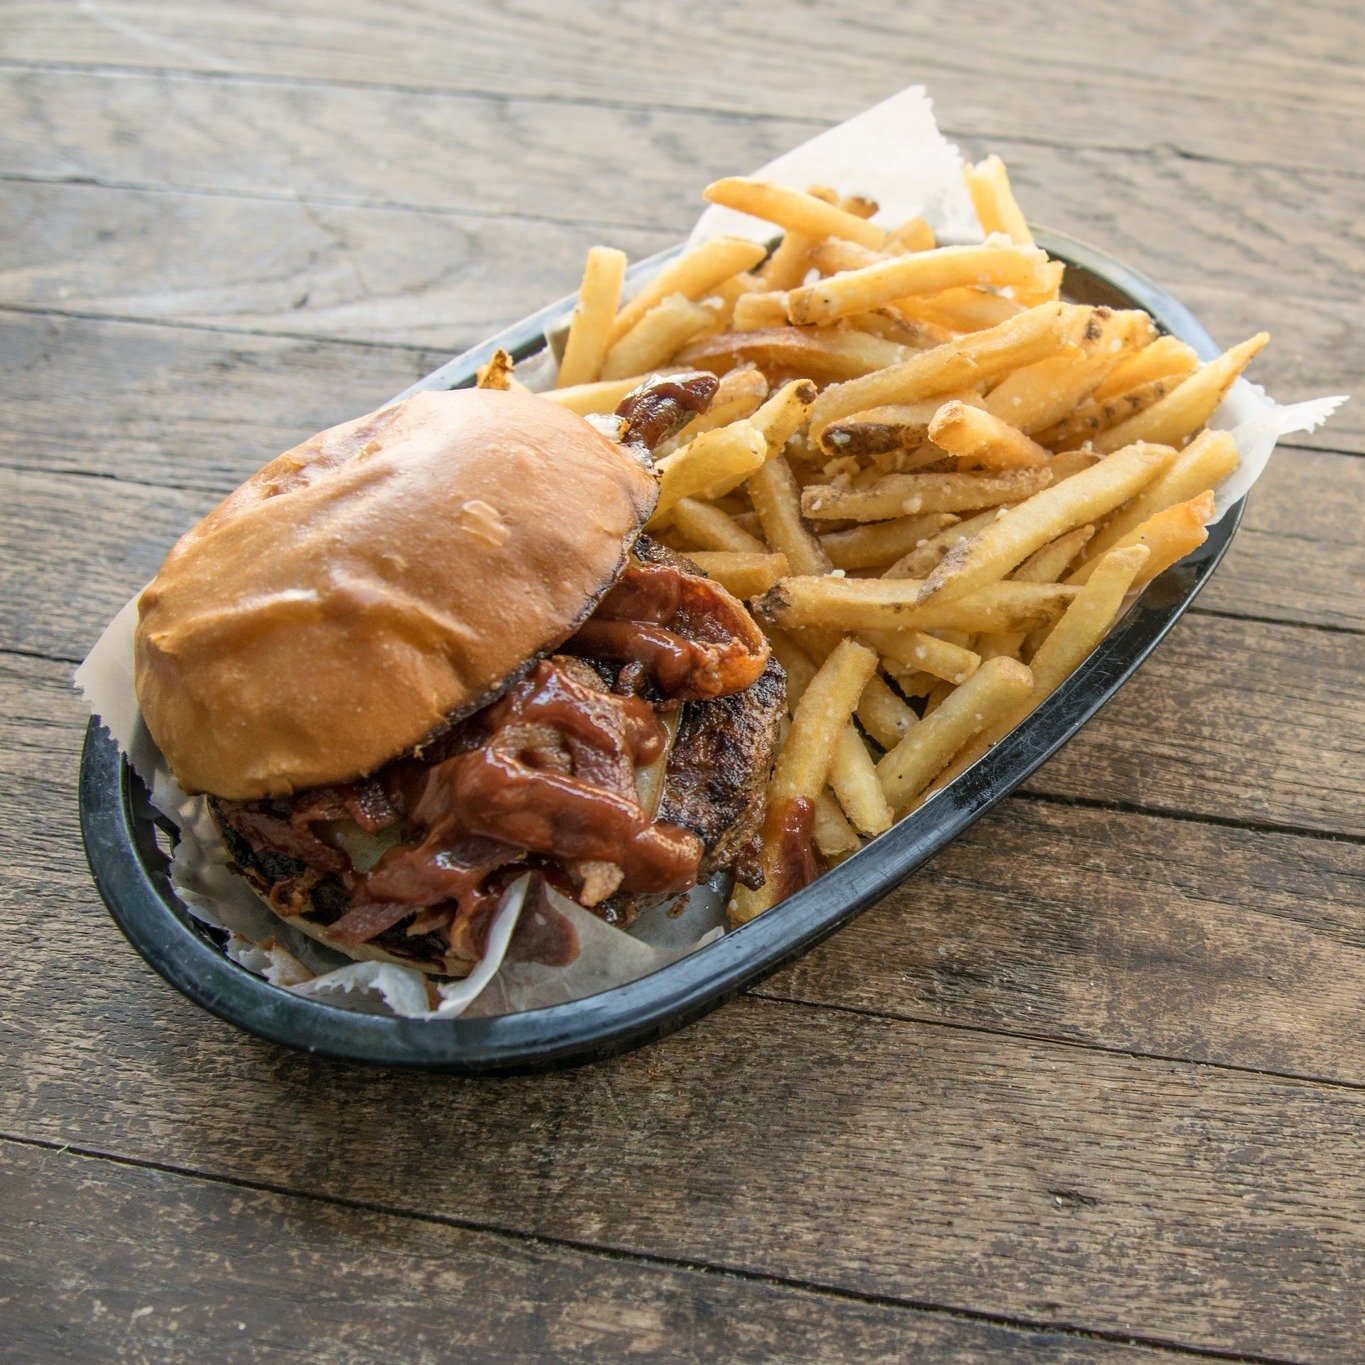 You aren't you when you're hungry and sweetie, a snickers bar isn't gonna help.

Cruise over for a mid-rare smoke burger and truffle fries and reset yourself.